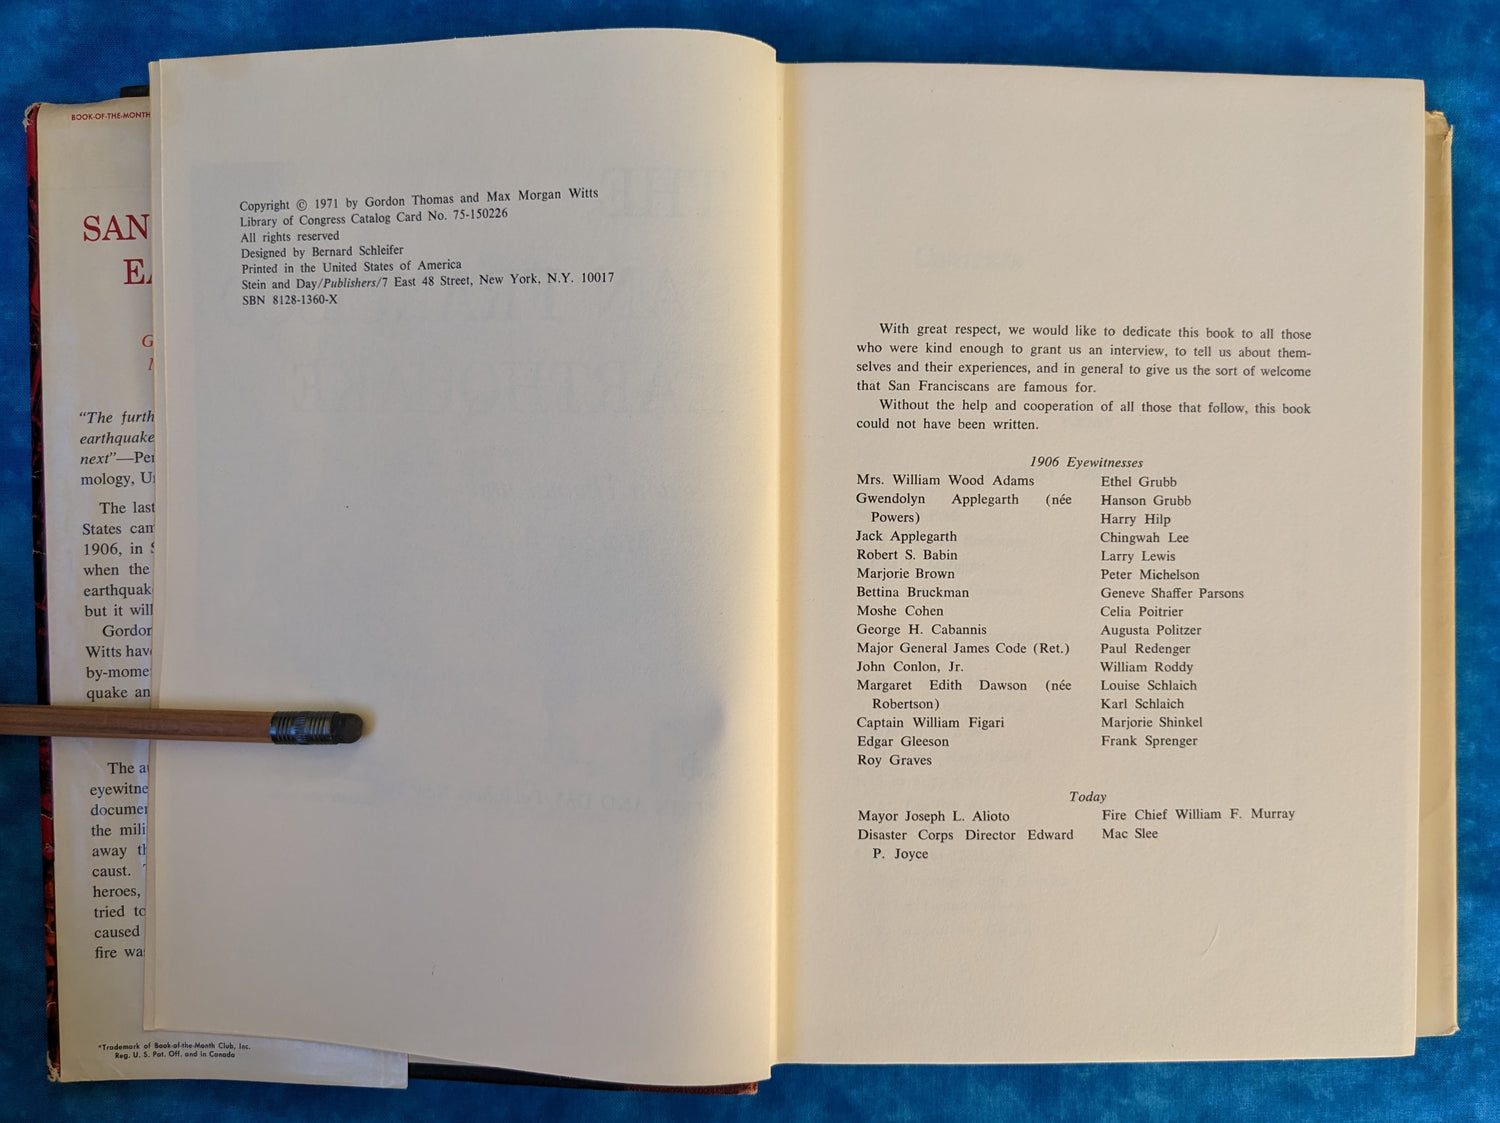 The San Francisco Earthquake vintage book acknowledgments